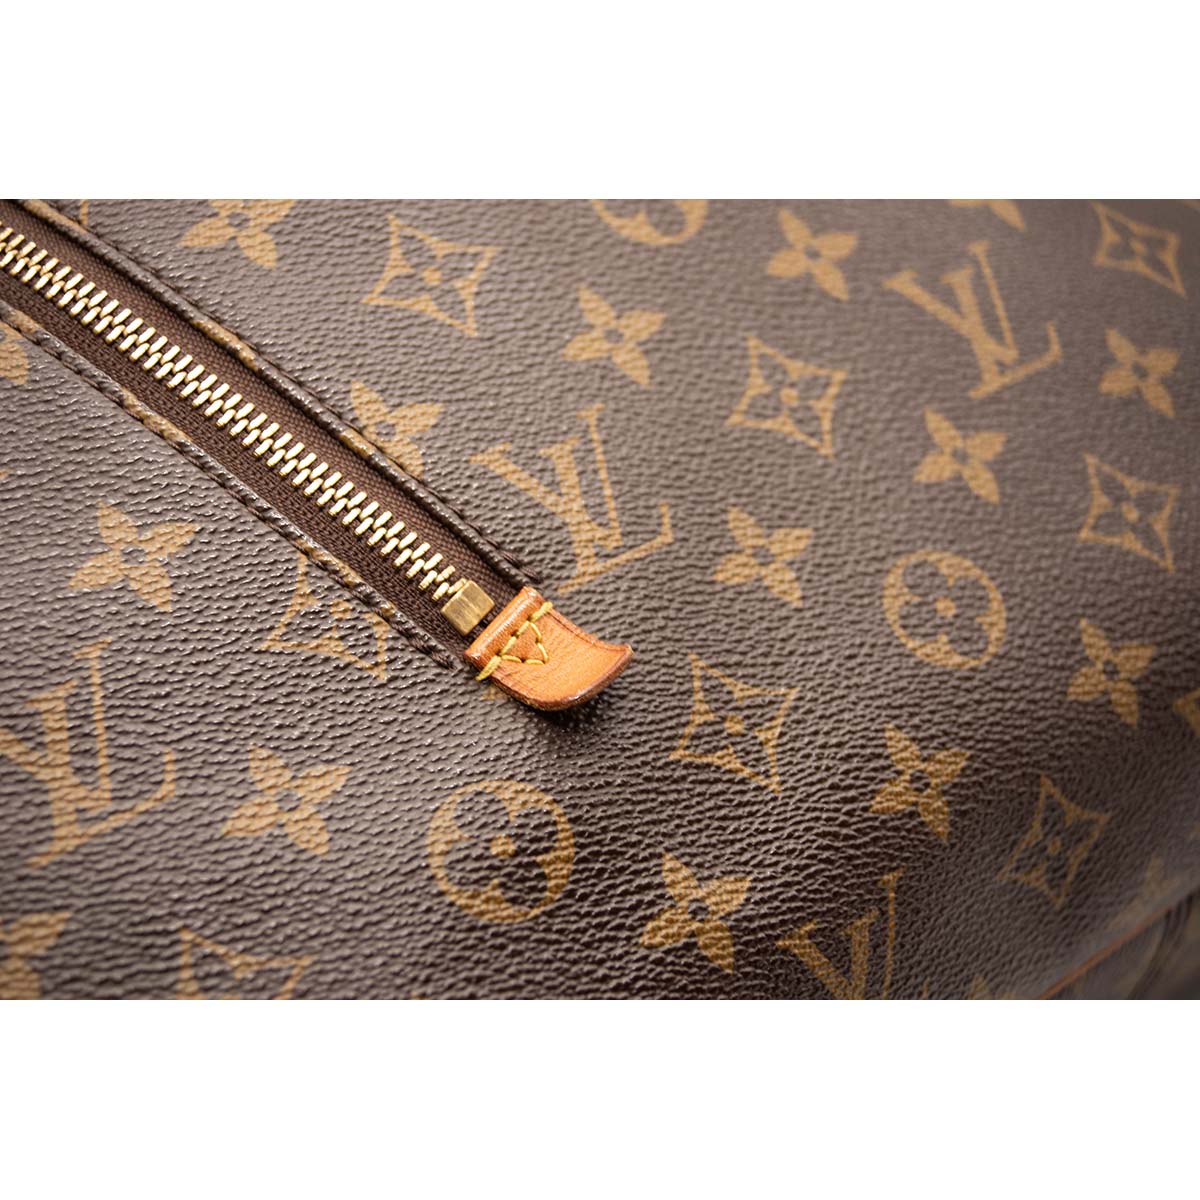 This gorgeous Louis Vuitton Delightful Pochette is now available